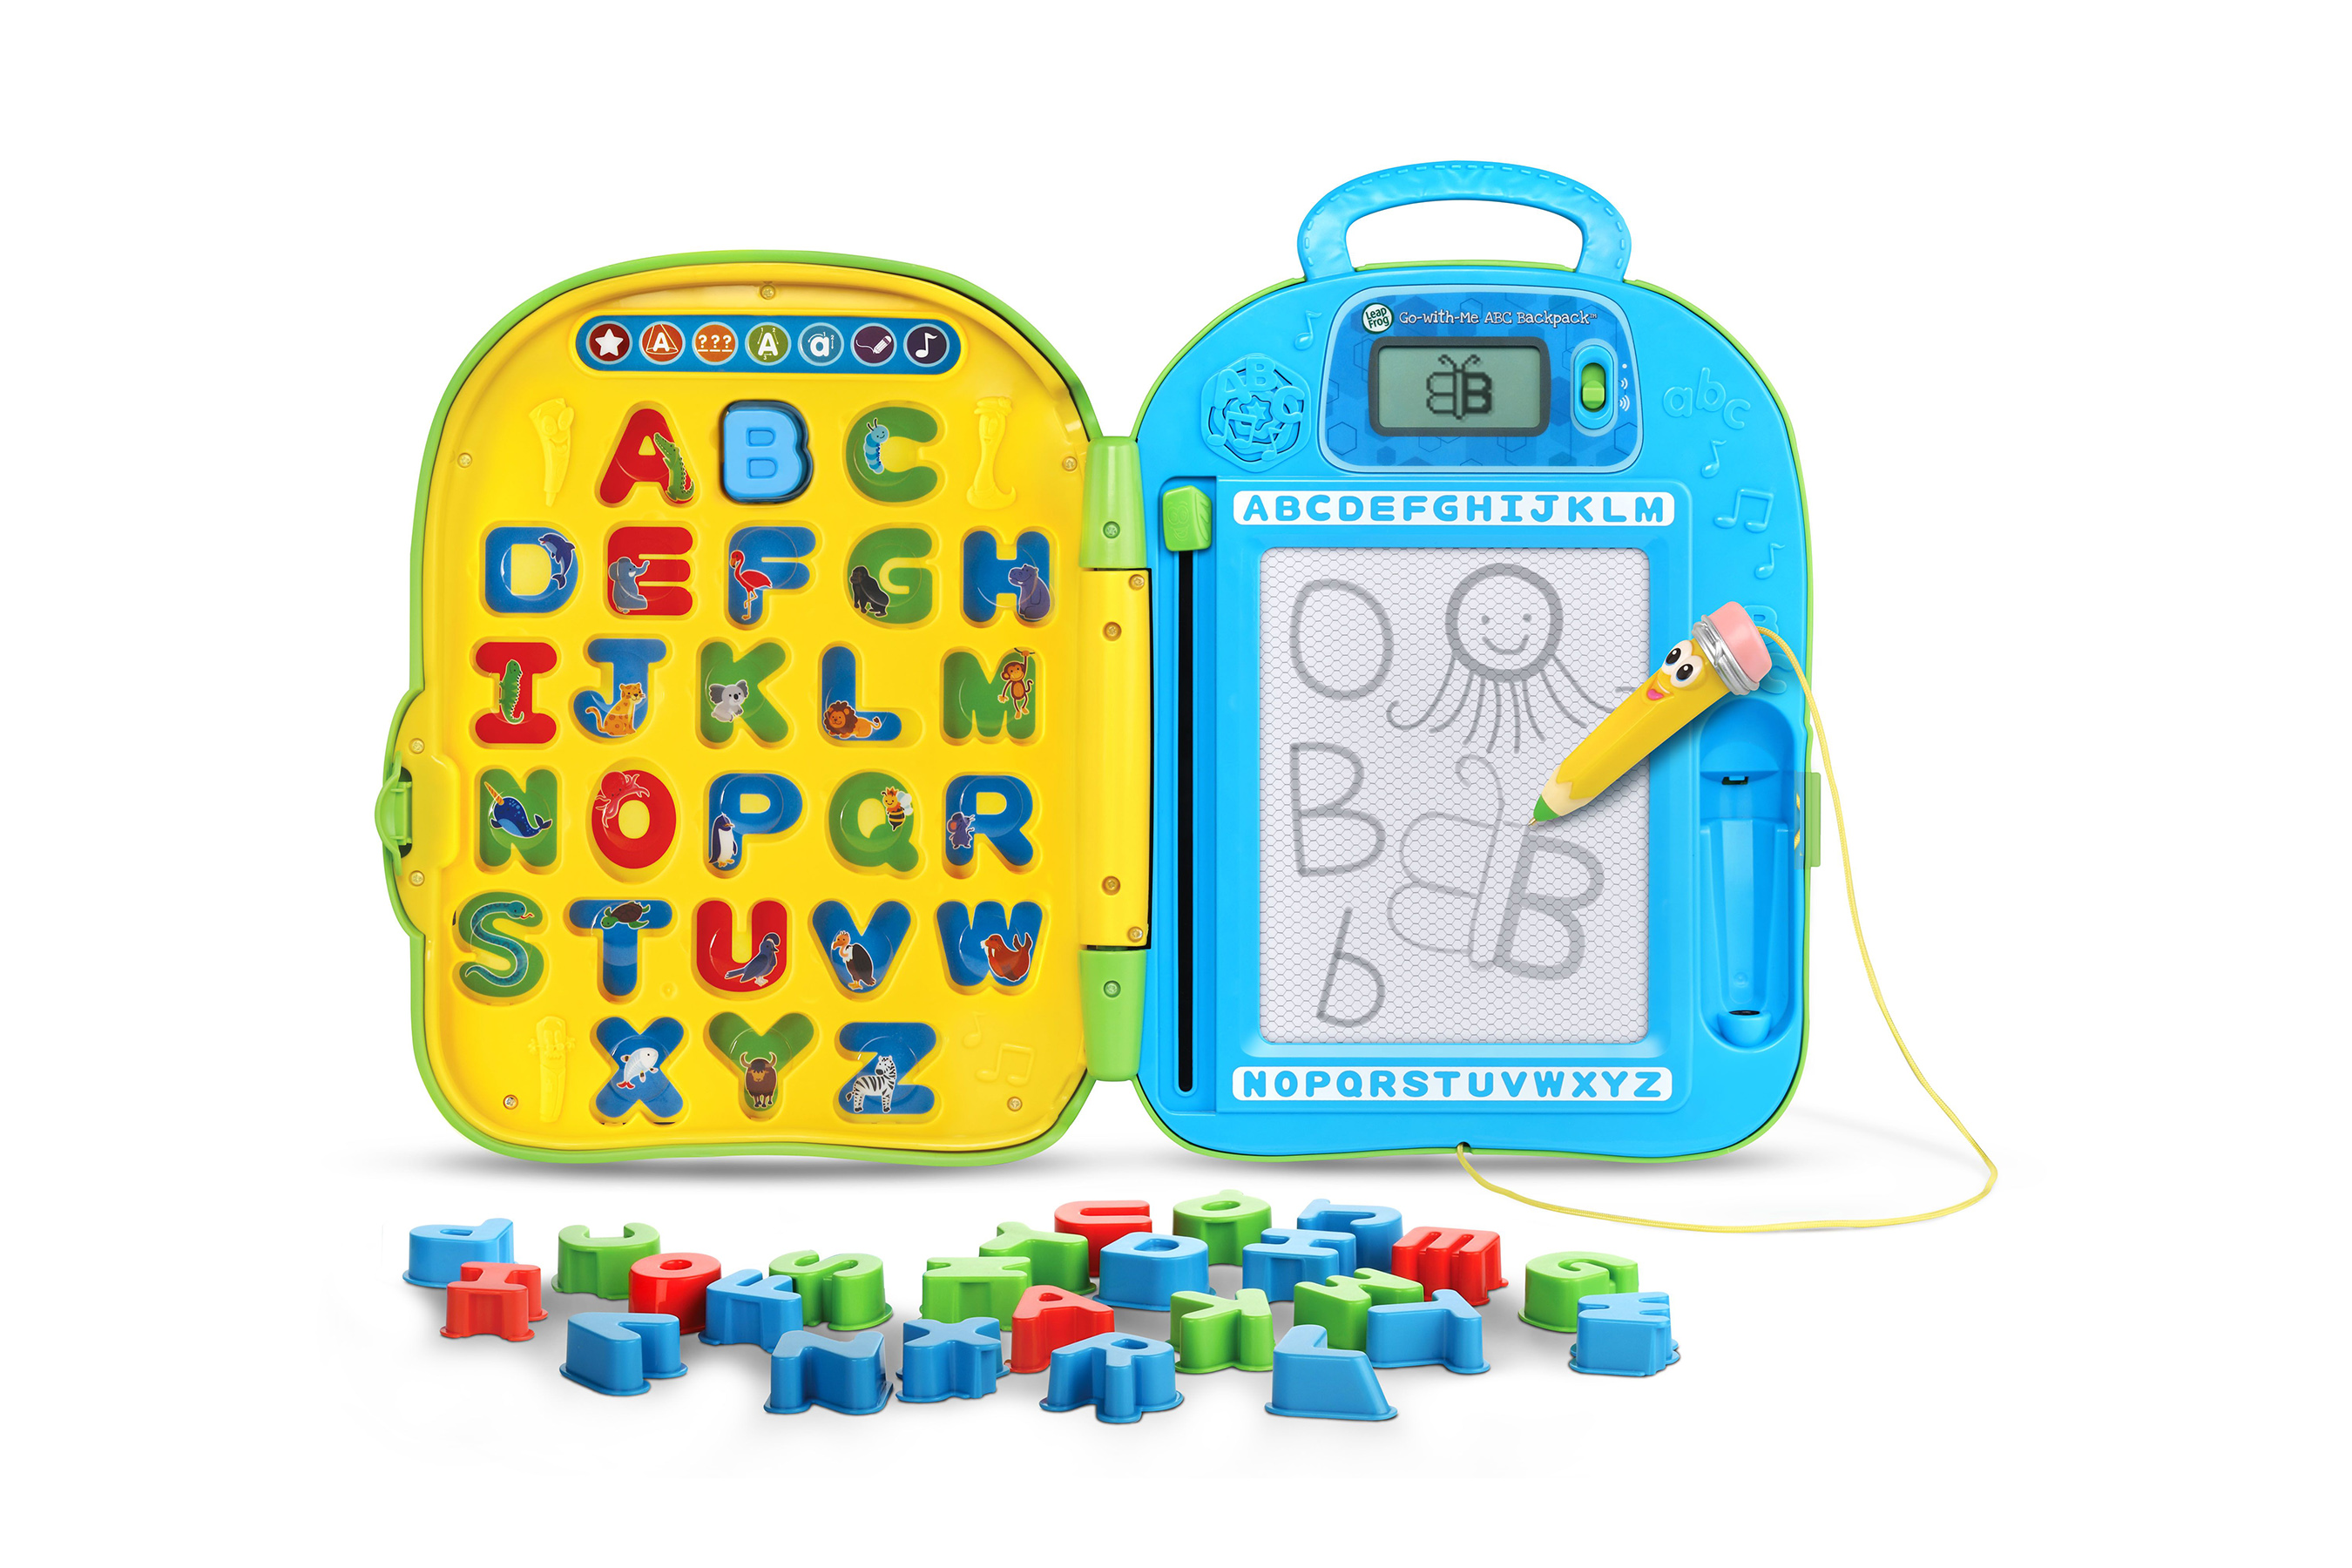 LeapFrog Go-with-Me ABC Backpacktm